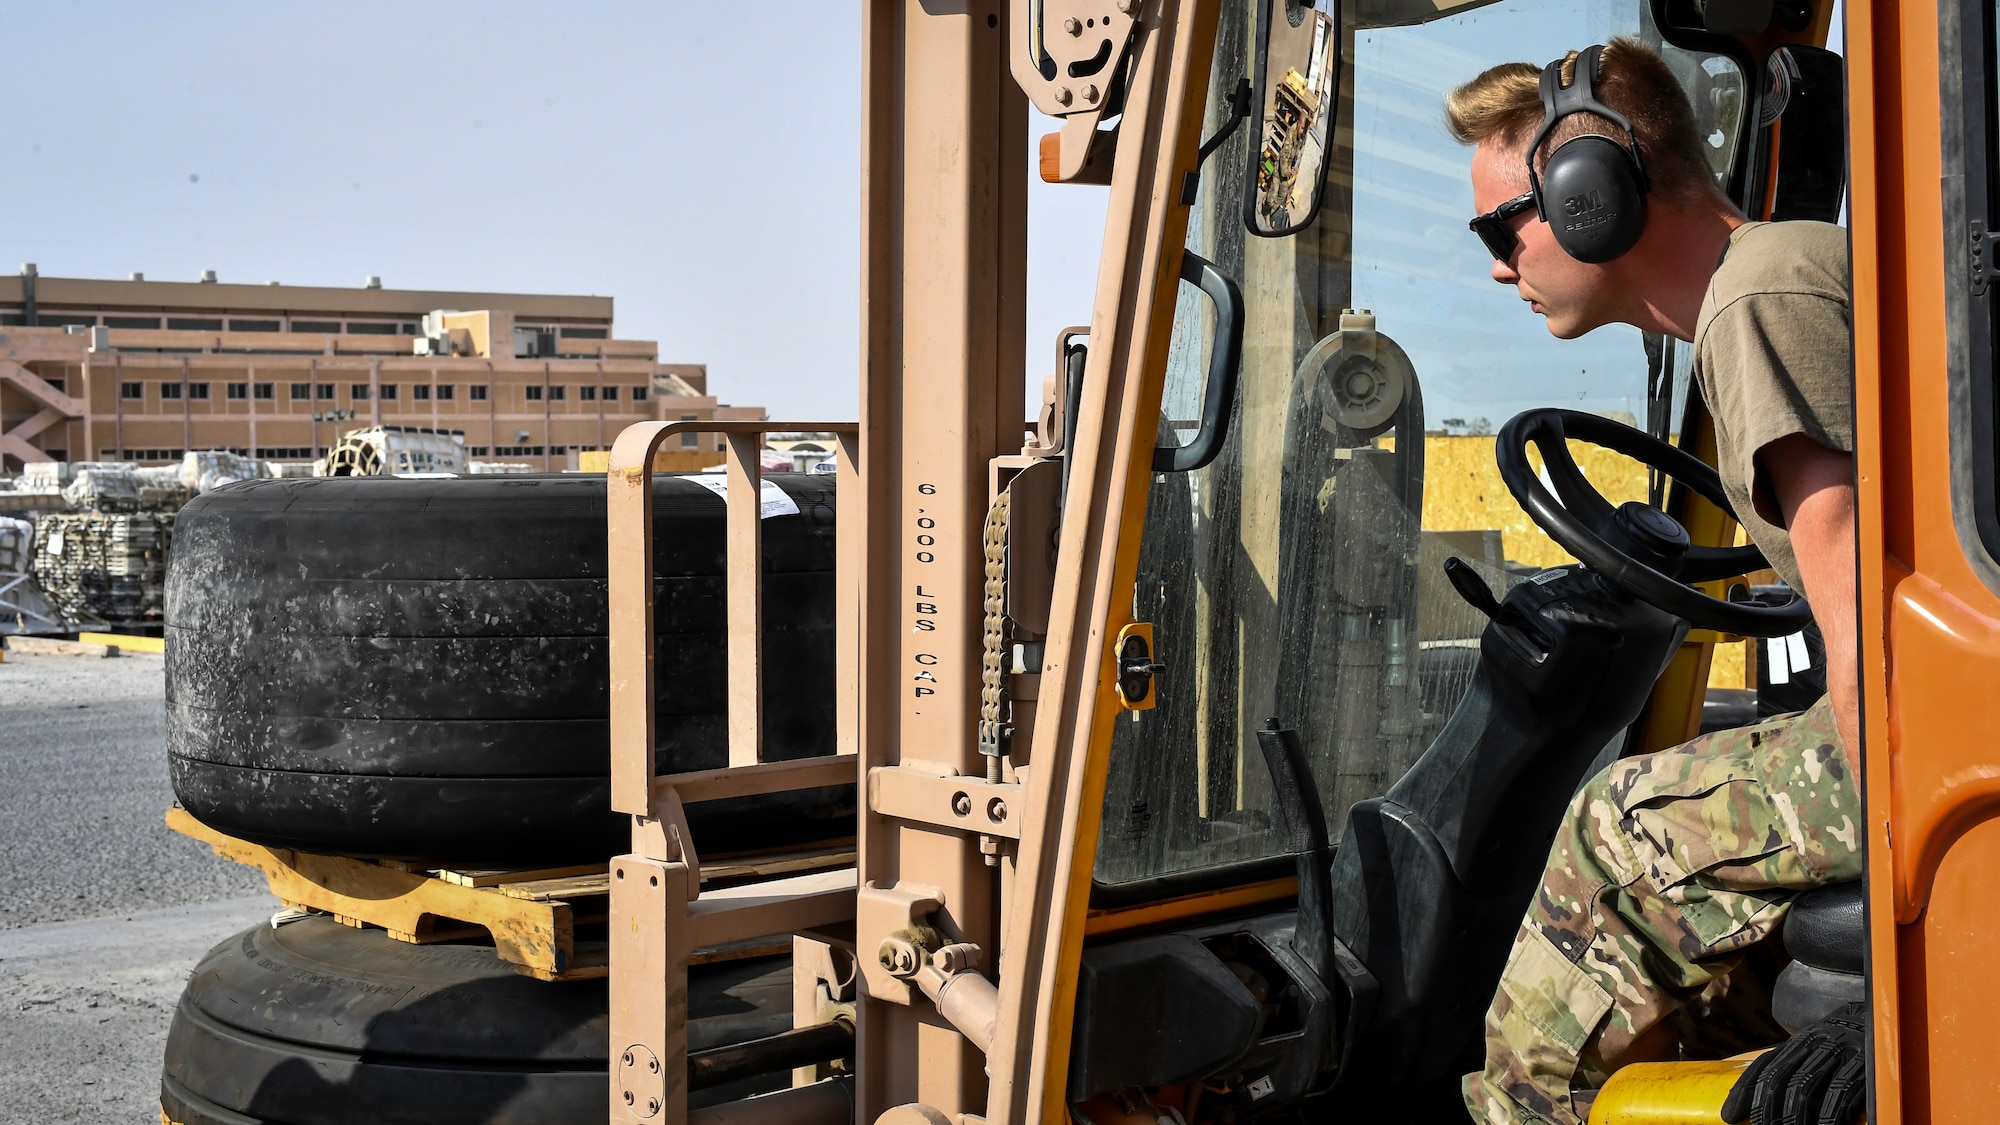 Senior Airman Dalton McWilliams, 386th Expeditionary Logistics Readiness Squadron aerial port cargo processing representative, operates a forklift at Ali Al Salem Air Base, Kuwait, Oct. 17, 2019. The aerial port here has contributed to more than 600 missions, moved nearly 12,000 passengers and over 4,000 tons of cargo in the last month, making them one of the busiest aerial ports in the world.